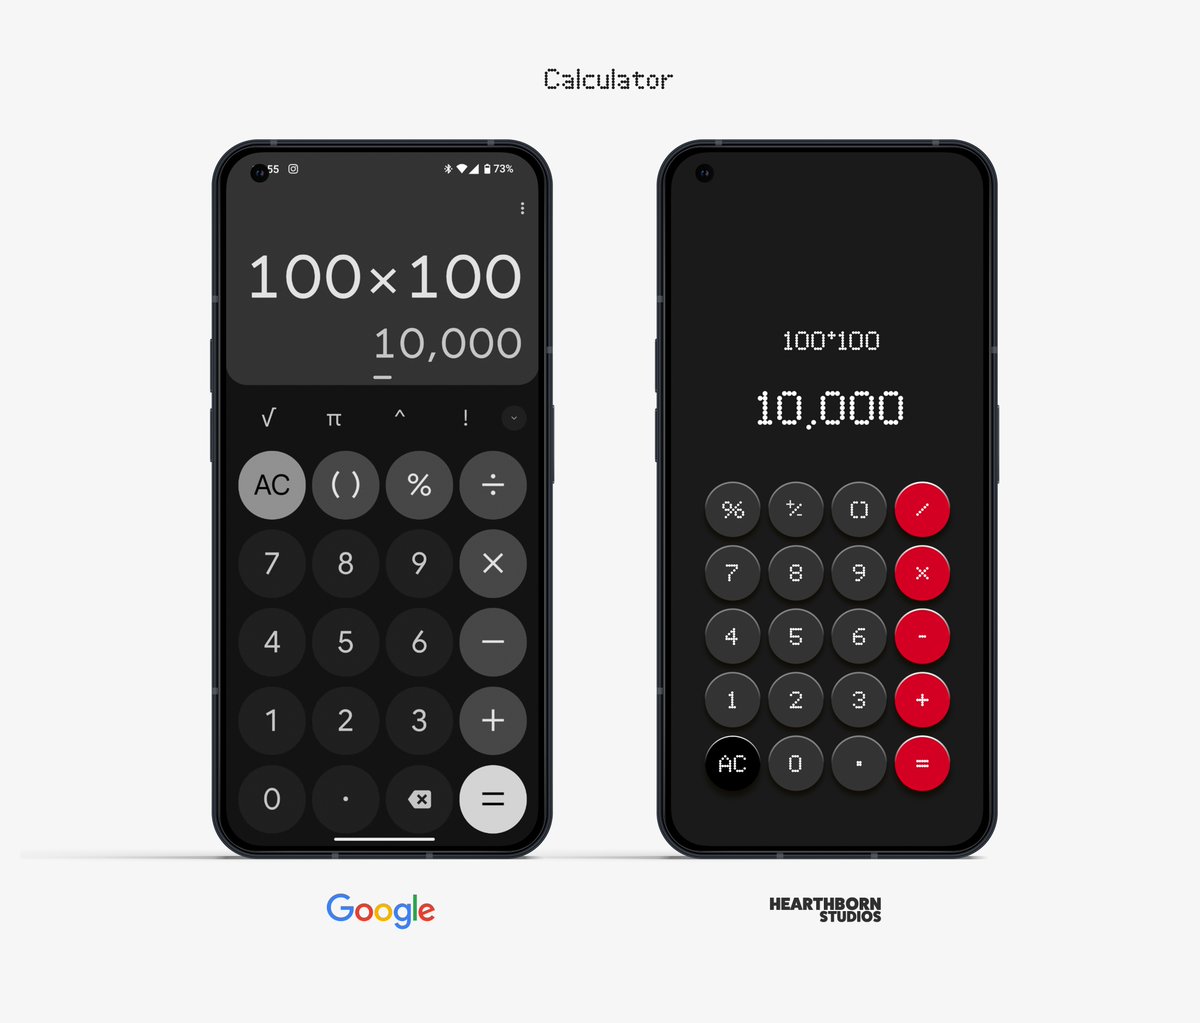 N Calc: Let's make Calculators fun again!

@nothing #nothing #apps #android #appdev #ui #ux #calculator #androidcommunity #nothingcommunity #minimal #nothingphone #nothingphone2 #nothingphone1